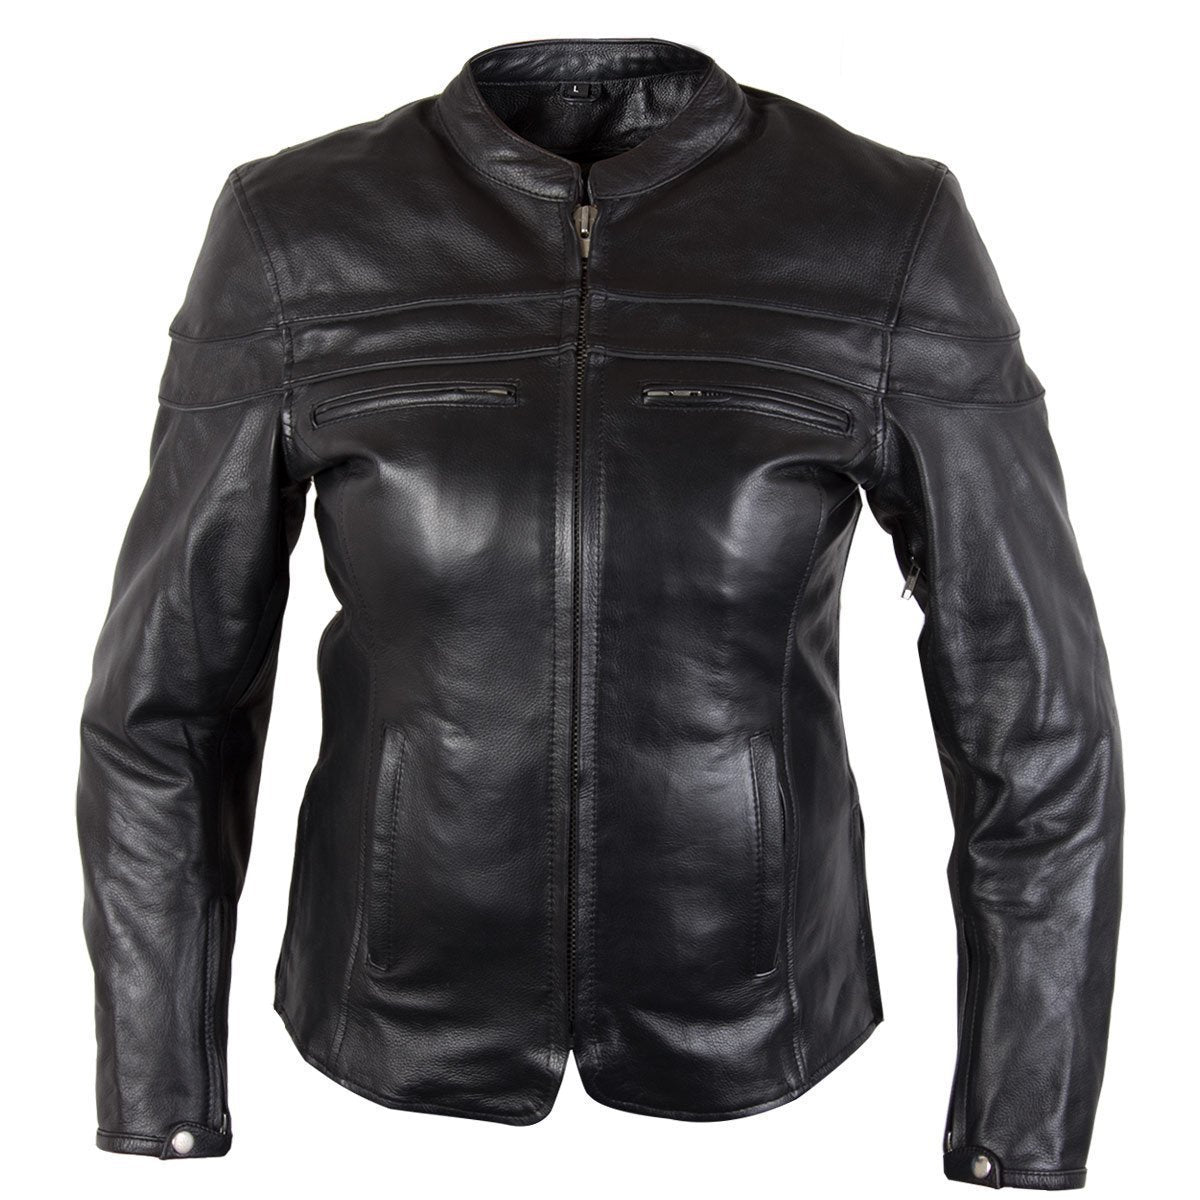 Xelement B7210 'Cool Rider' Men's Black Vented Leather